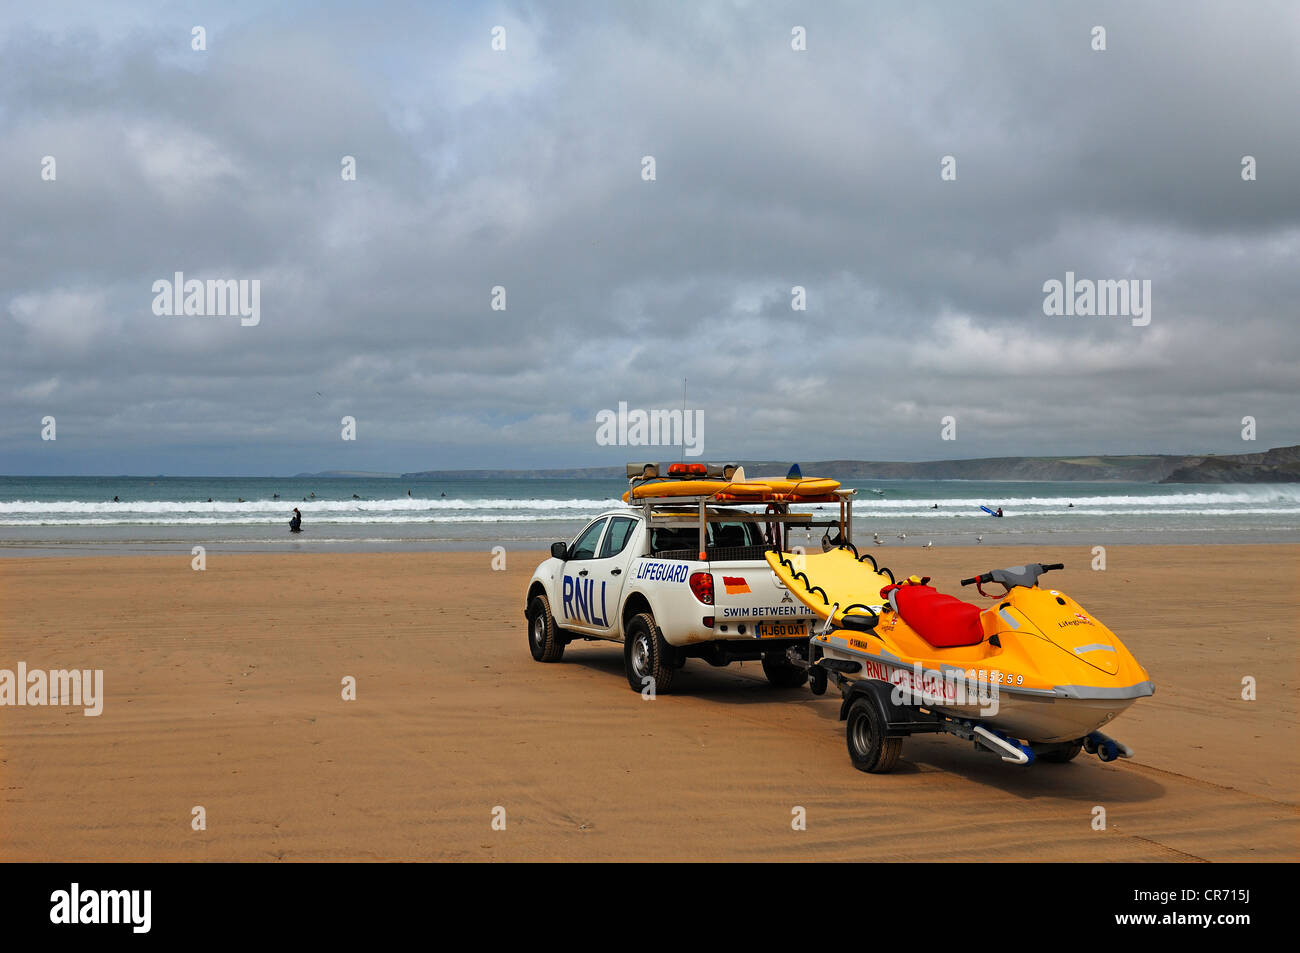 Life guard on the beach of Newquay during stormy weather, Newquay, Cornwall, England, United Kingdom, Europe Stock Photo